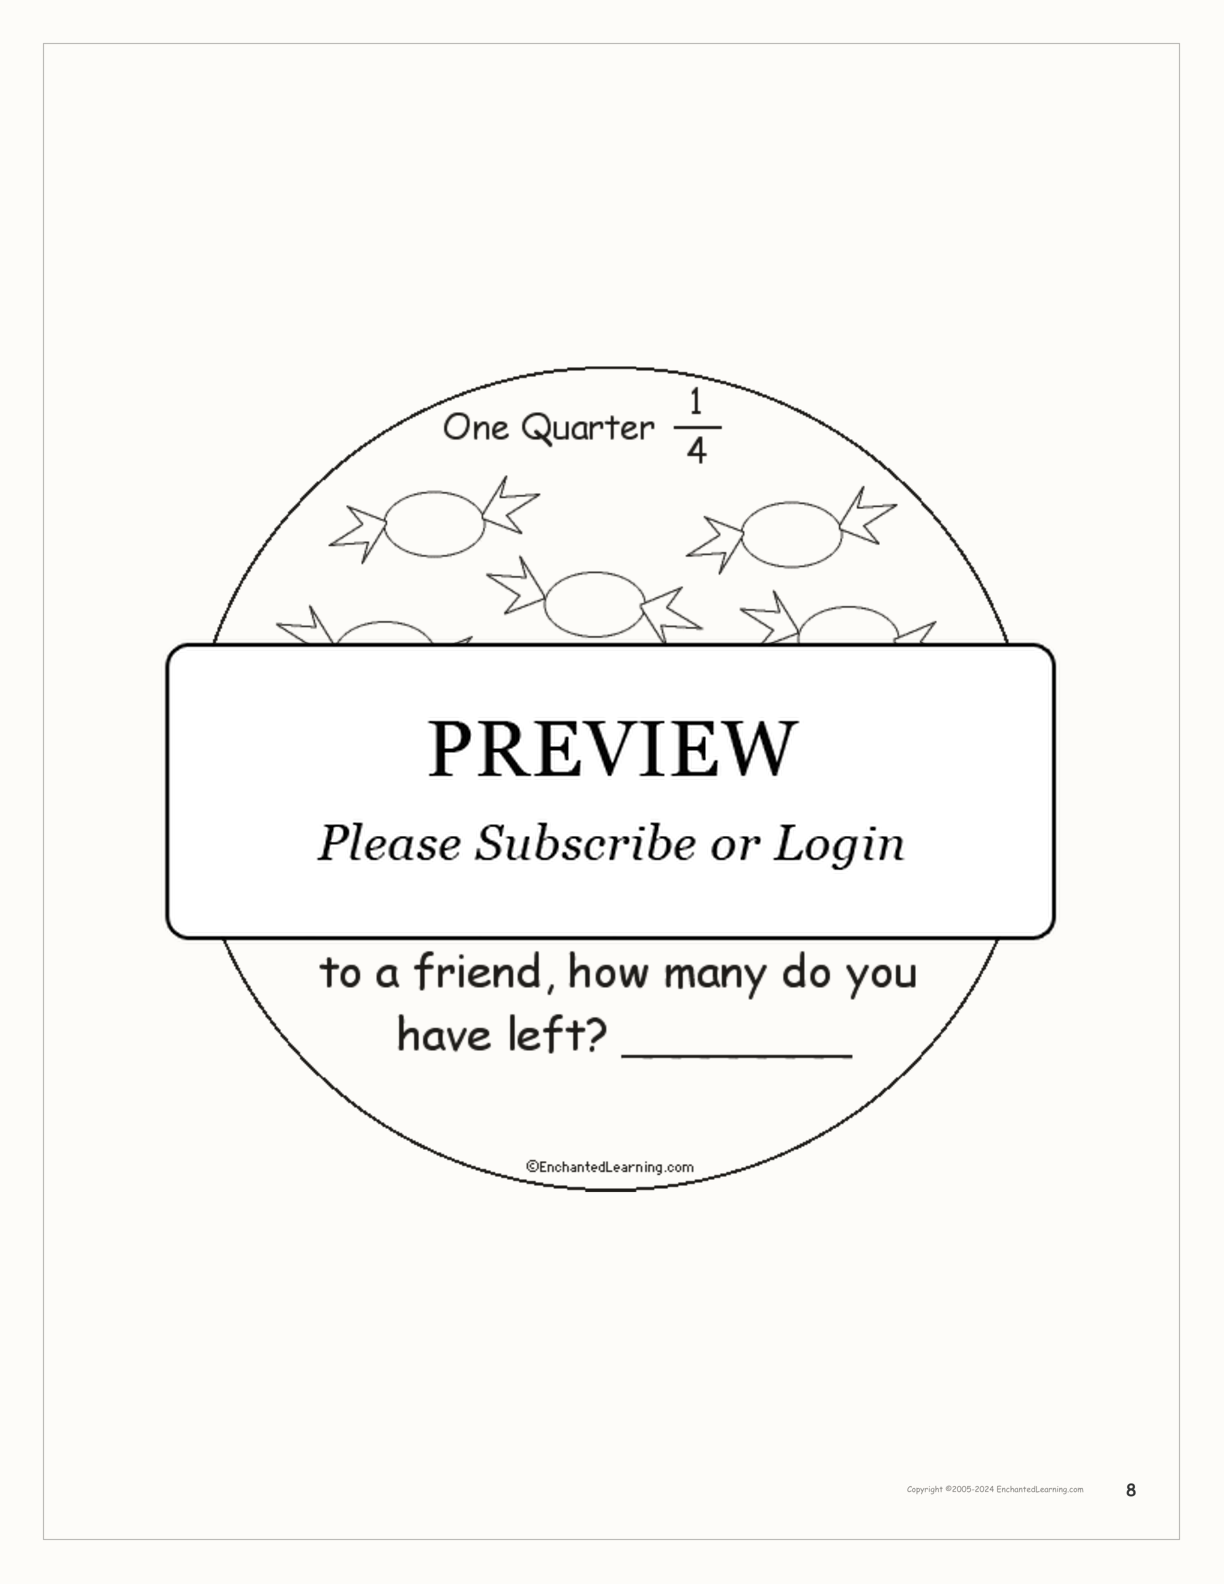 One Quarter: A Book on Fractions interactive printout page 8